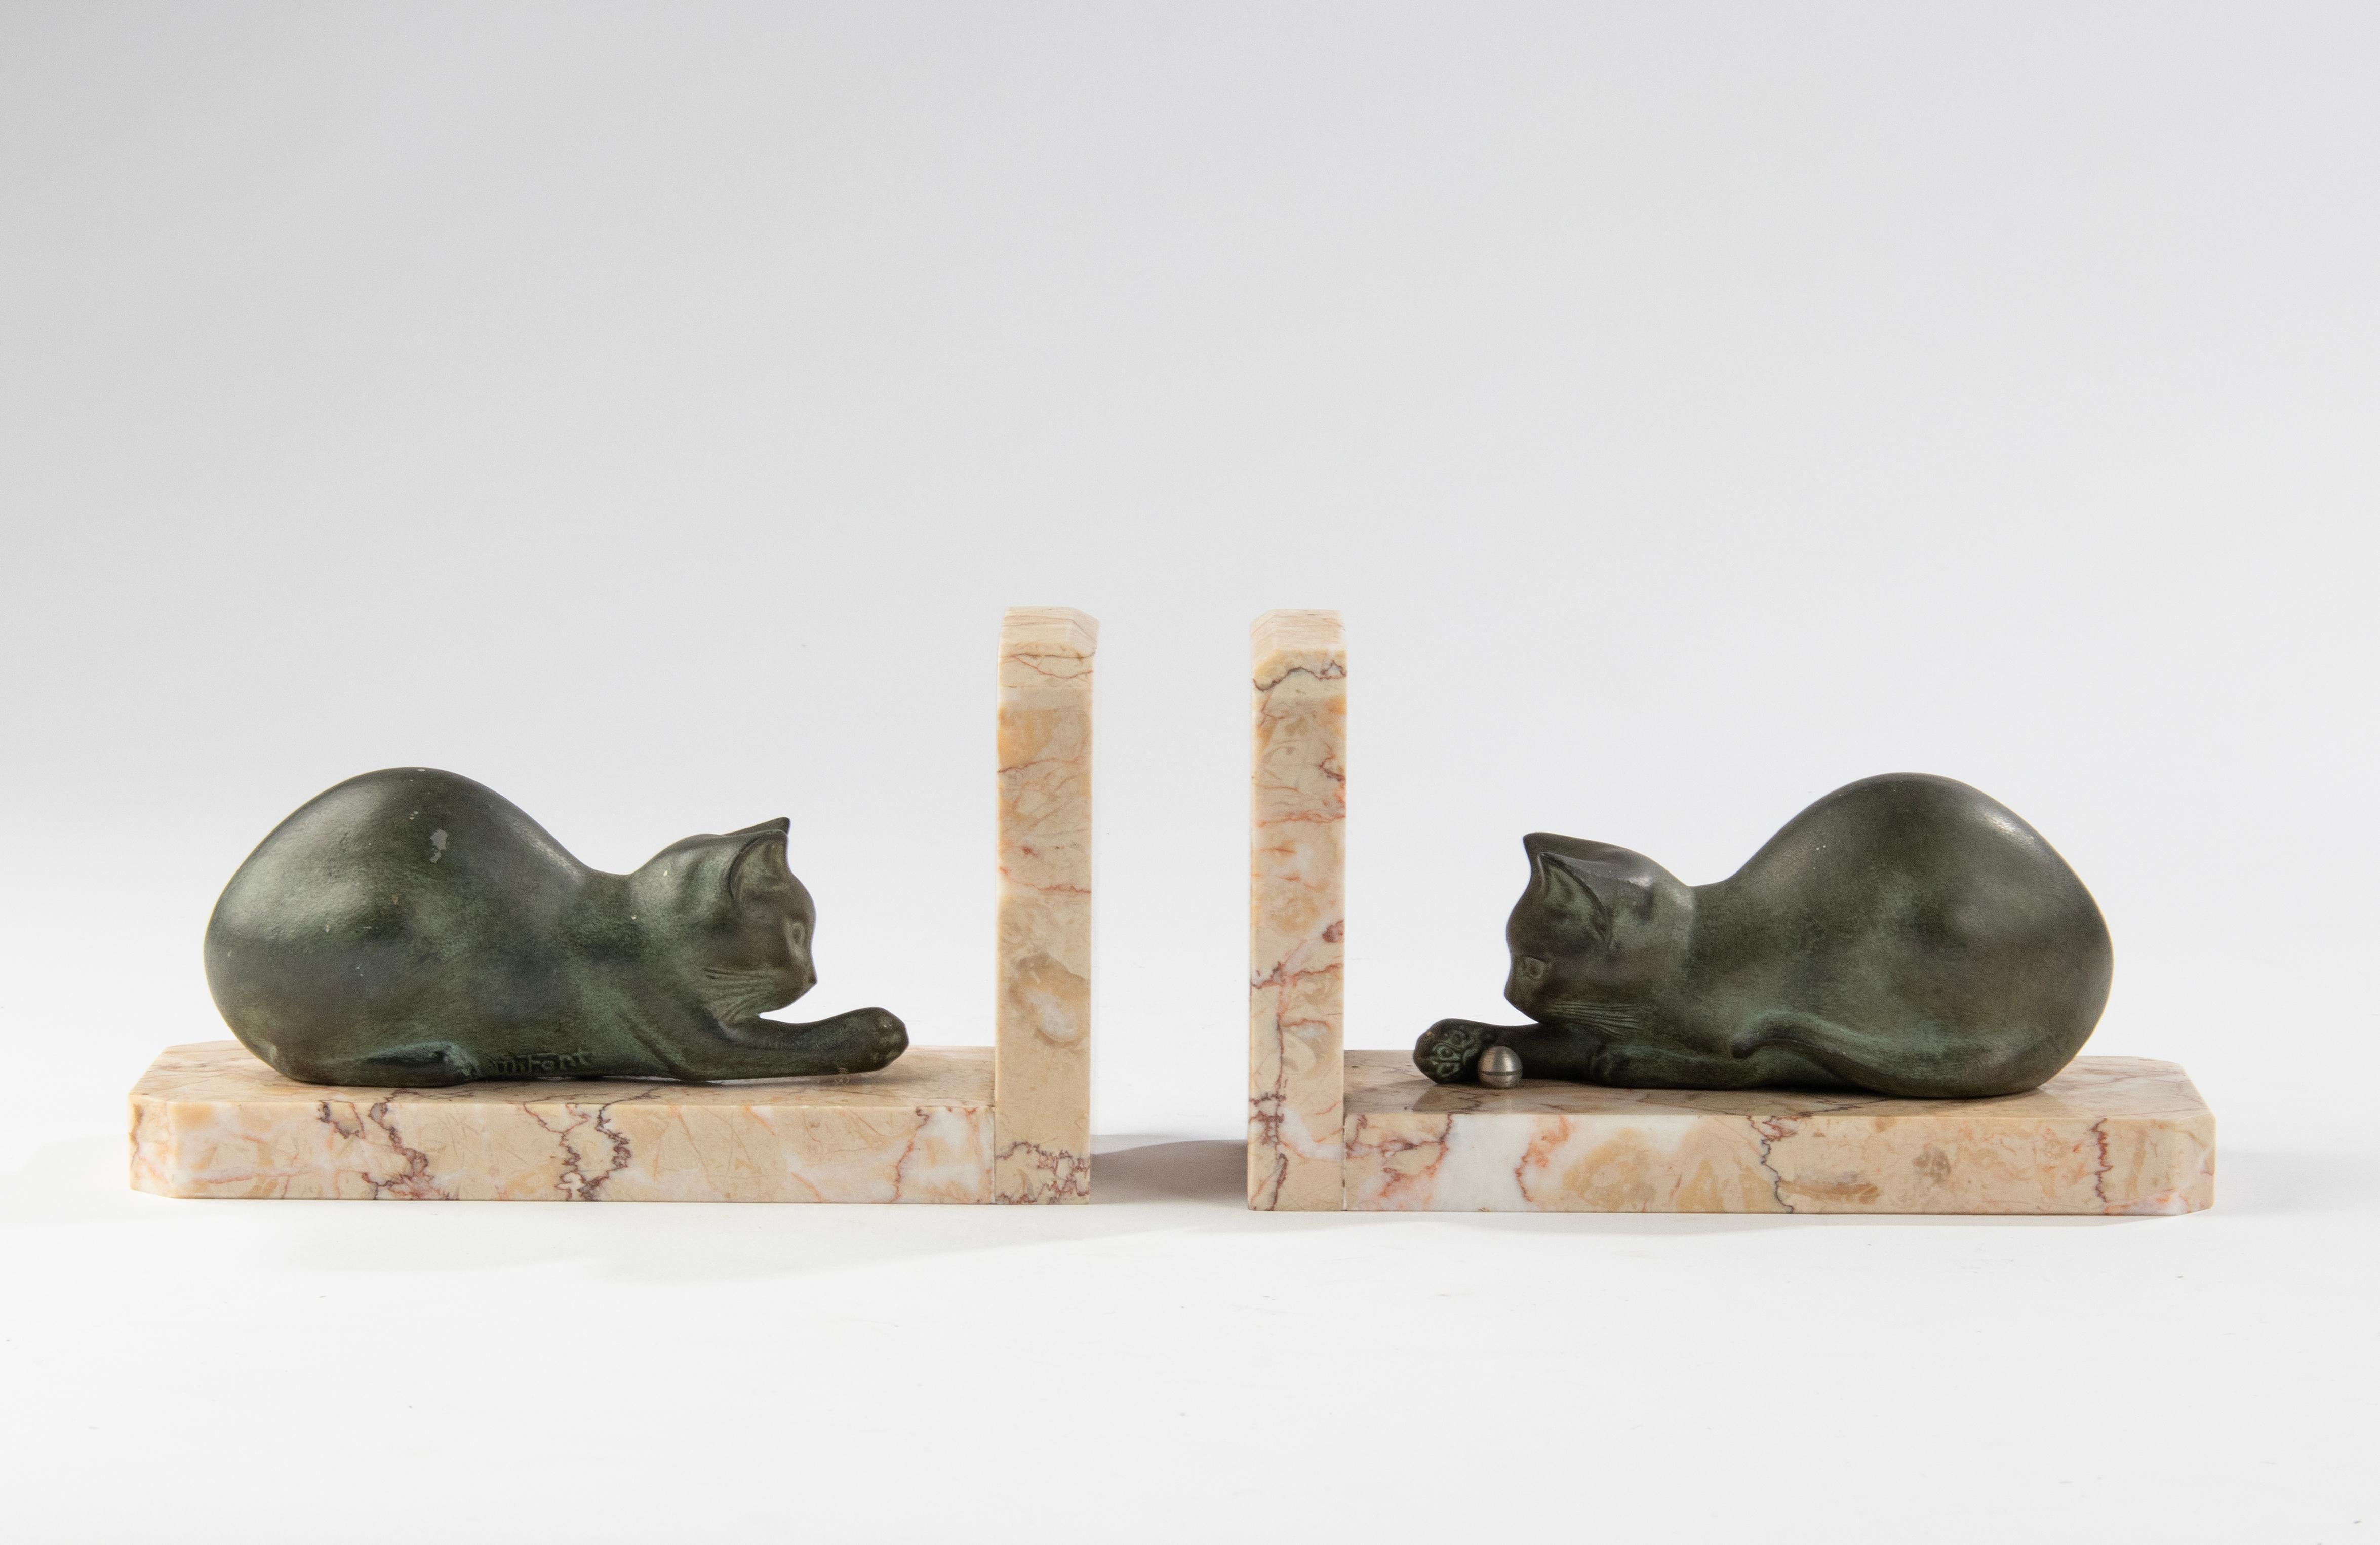 Nice pair of Art Deco period book ends with sculptures of cats playing what a small ball. Made of casted spelter, patinated in a green bronze-like color, on marble bases. Marked Marti Font. In good condition with minor signs of age. Made in France